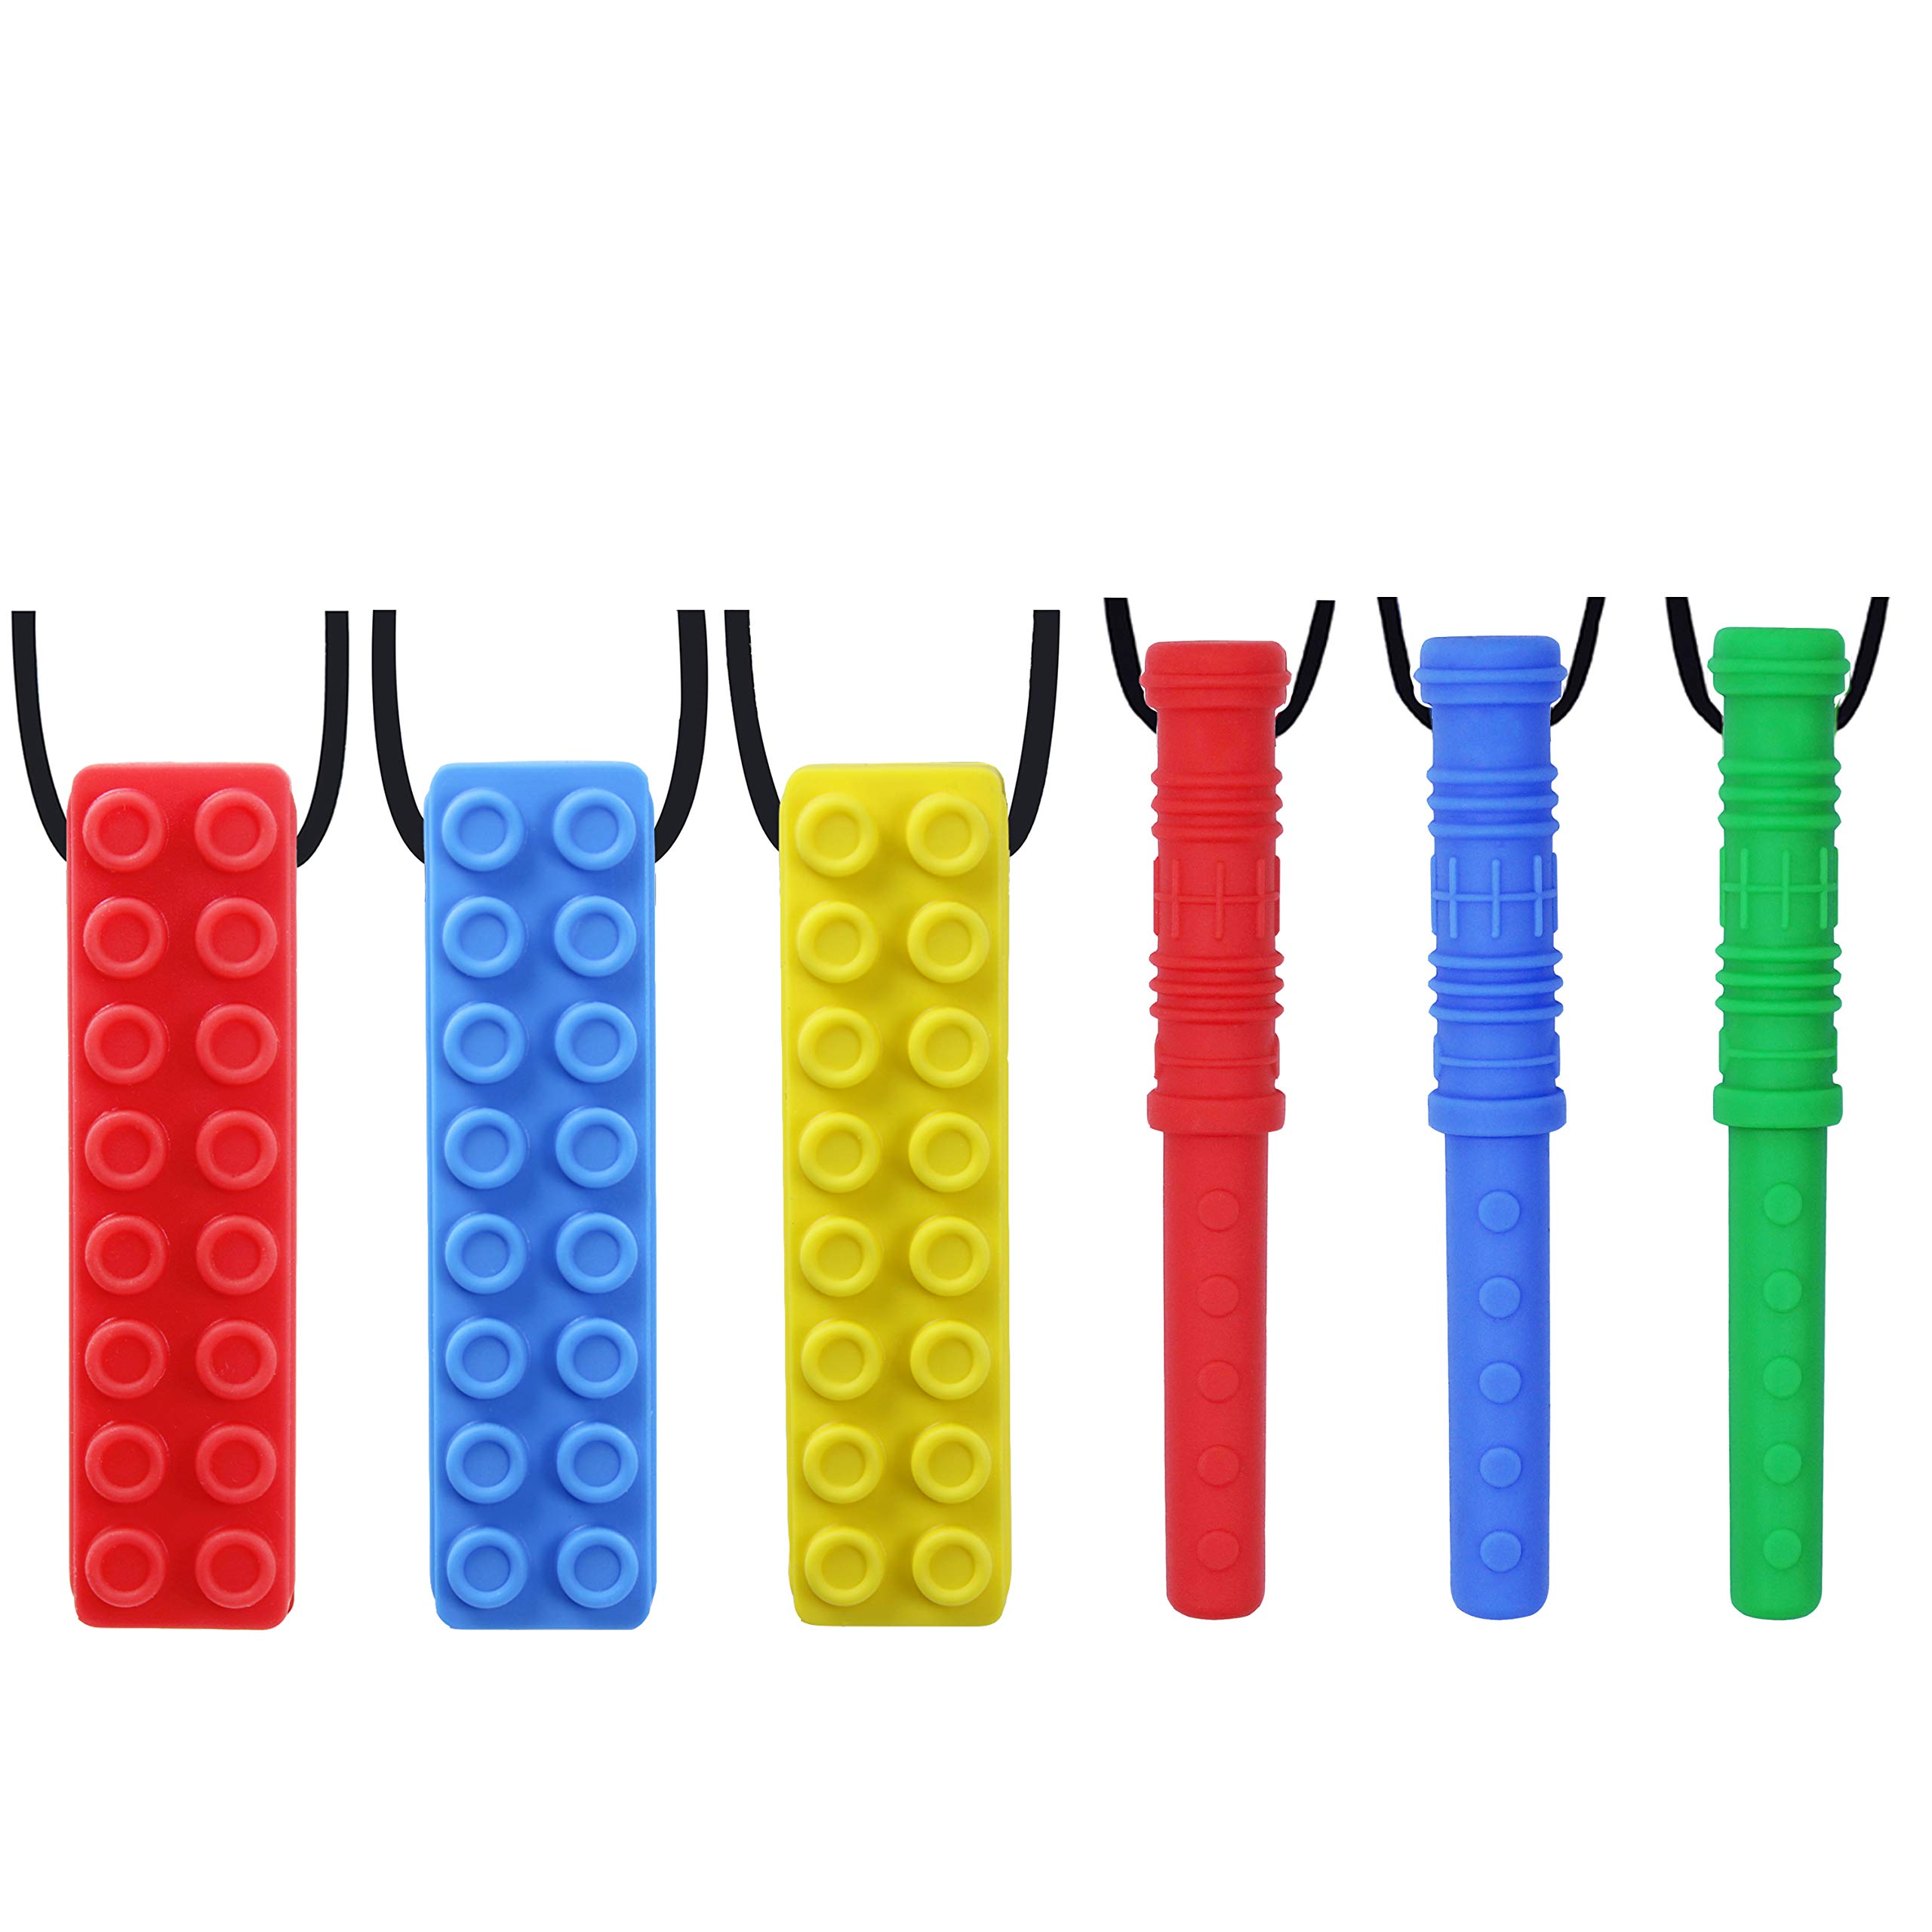 Sensory Chew Necklace for Kids and Boys - Silicone Dinosaur Chewable  Necklaces for Teething, Autism, Biting, ADHD, SPD, Oral Sensory Chewy  Toy(Blue/Green/Red) : Amazon.com.au: Baby